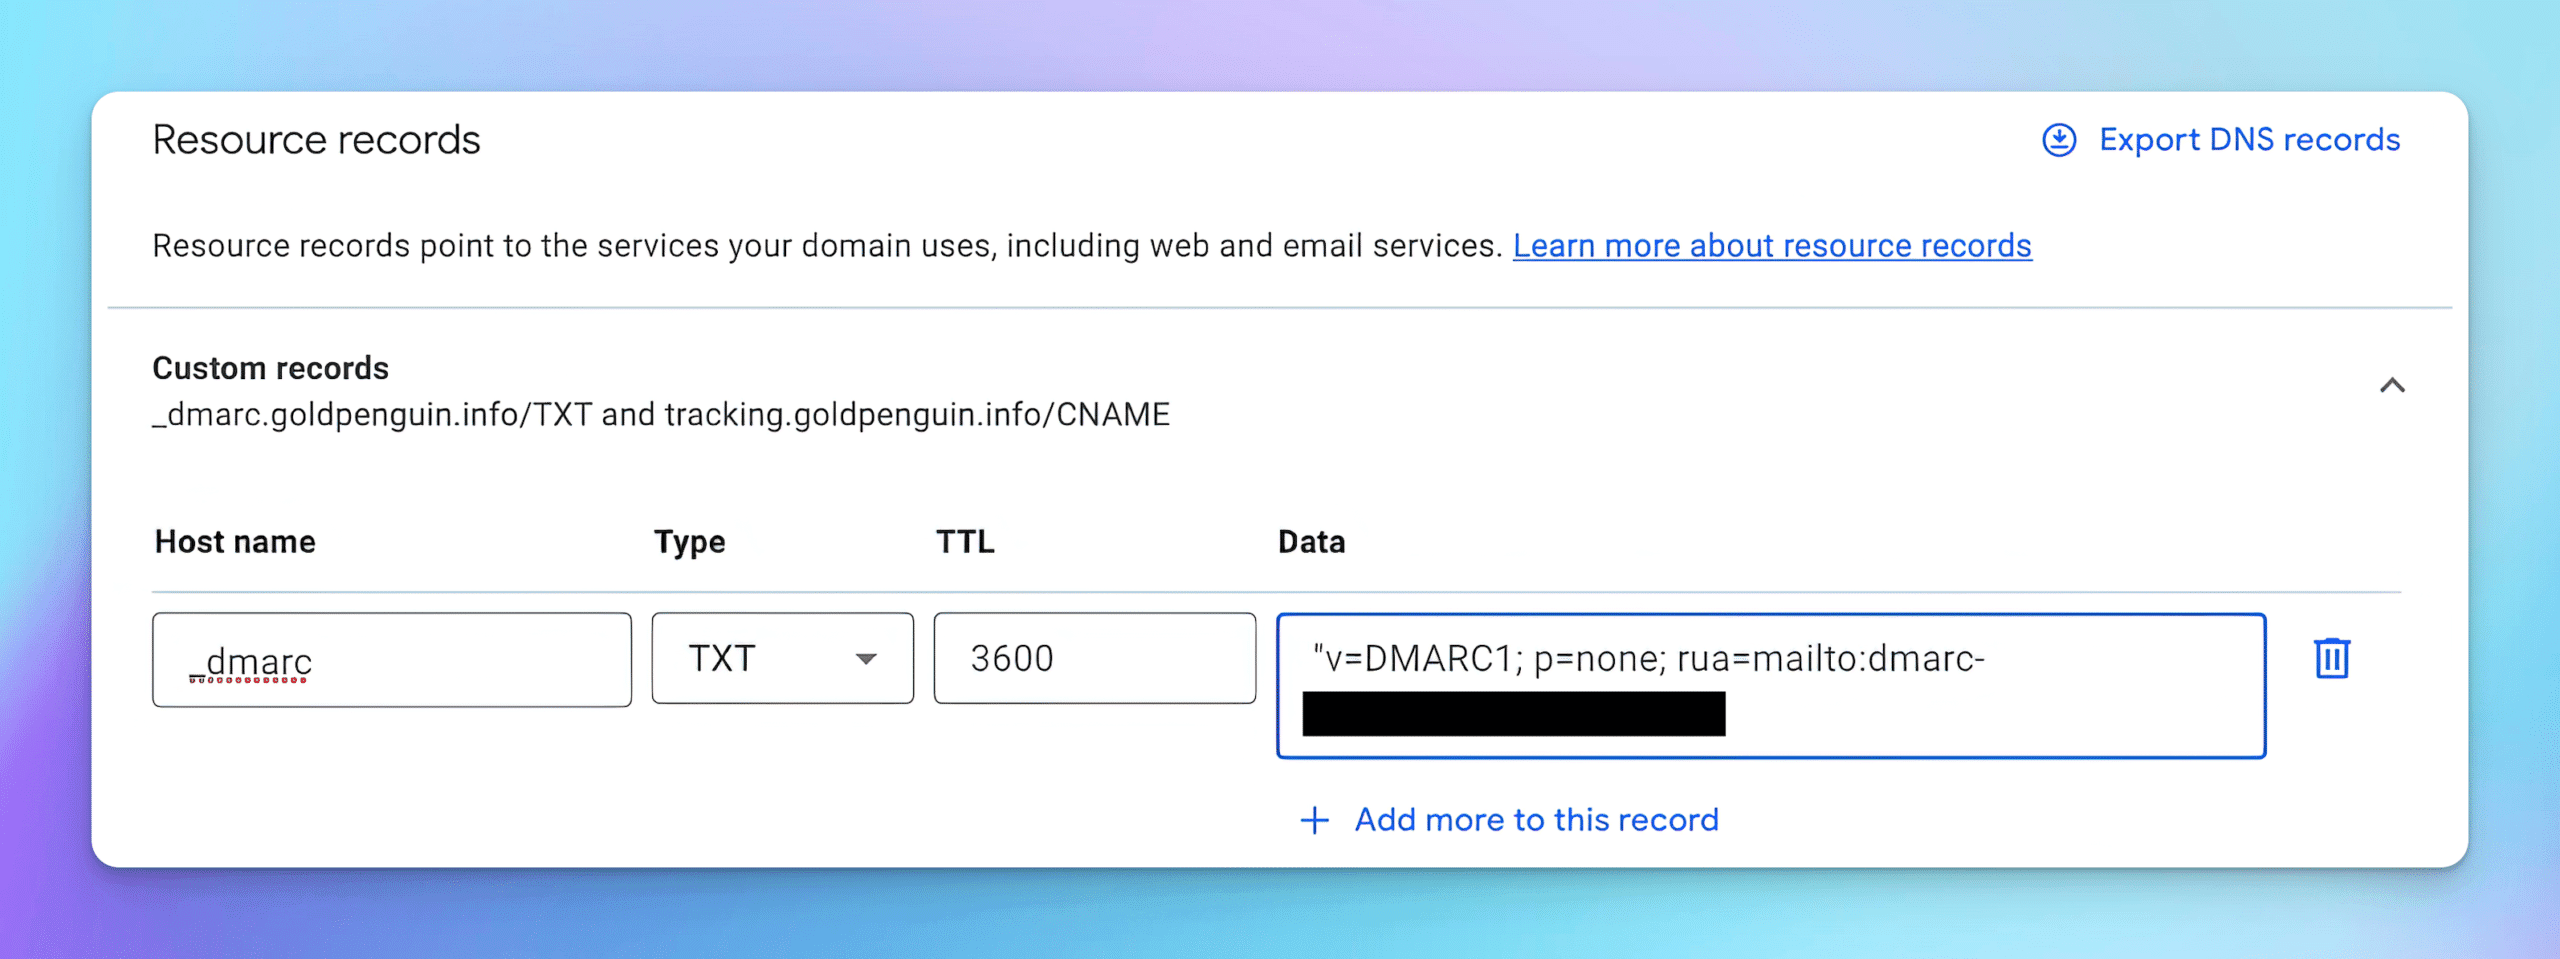 Example of DMARC custom record successfully added